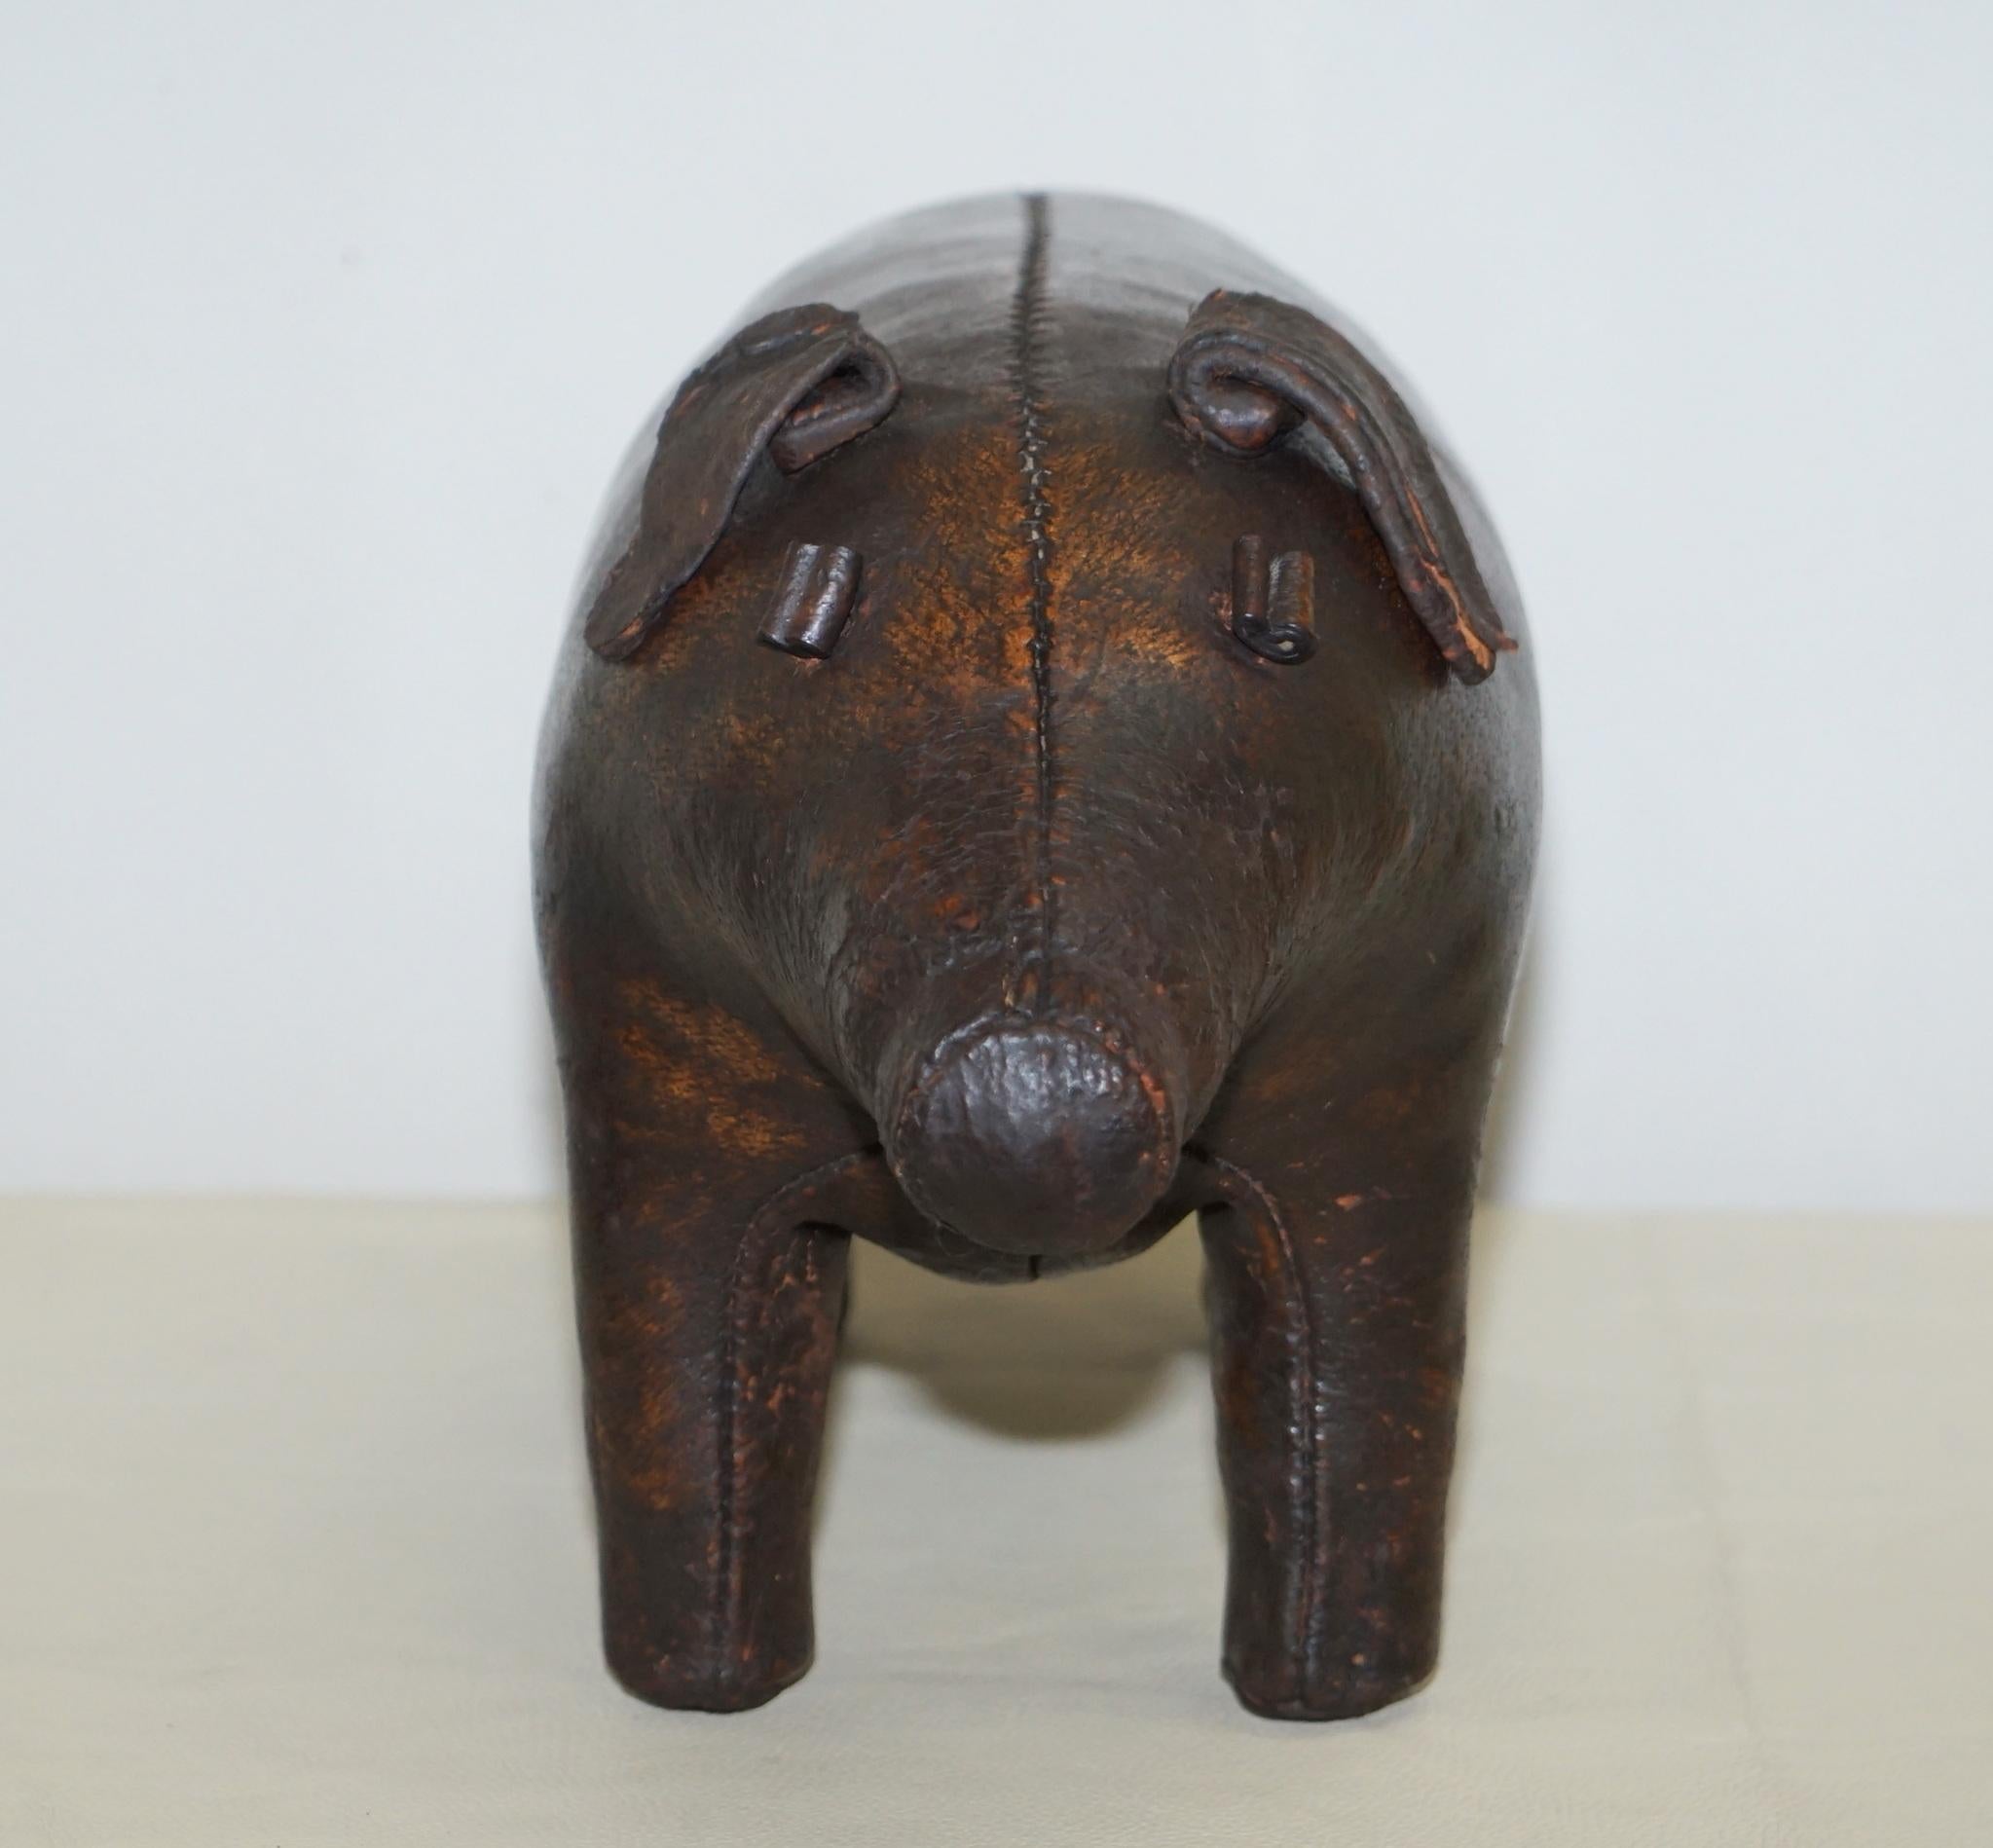 We are delighted to offer for sale this absolutely sublime original 1930s Liberty’s London Omersa brown leather land dyed pig footstool

I have three originals in stock, a Rhino in lovely order circa 1950s, a pig circa 1930s and an Elephant circa